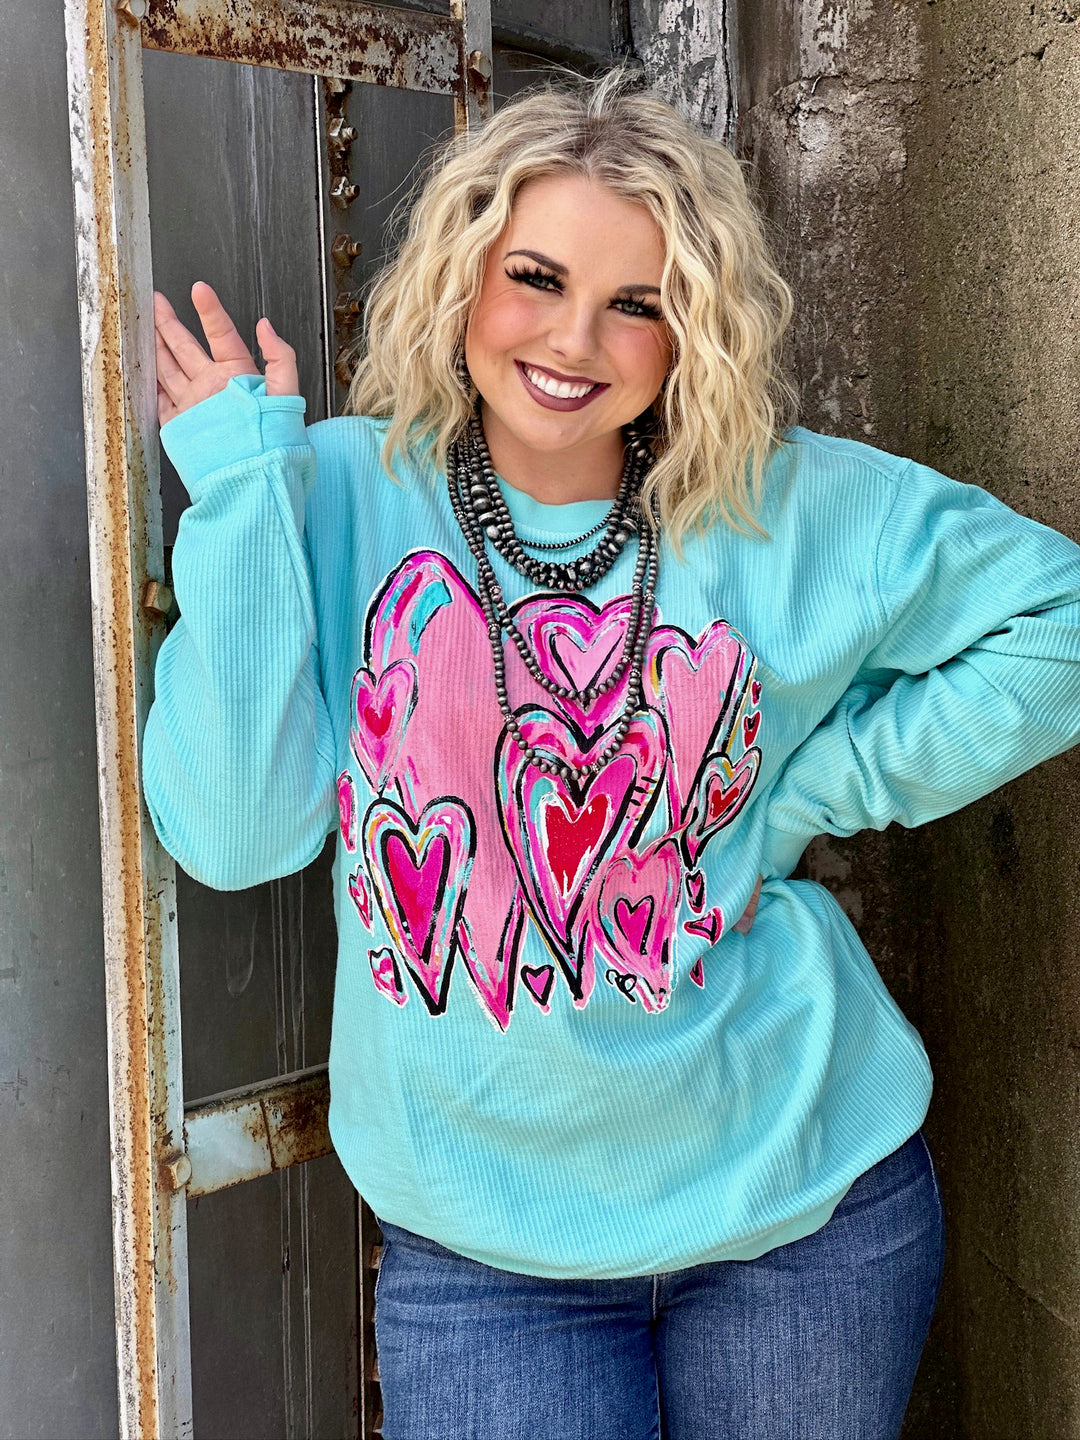 Callie's Blue Corded Bunches of Love Sweatshirt by Texas True Threads